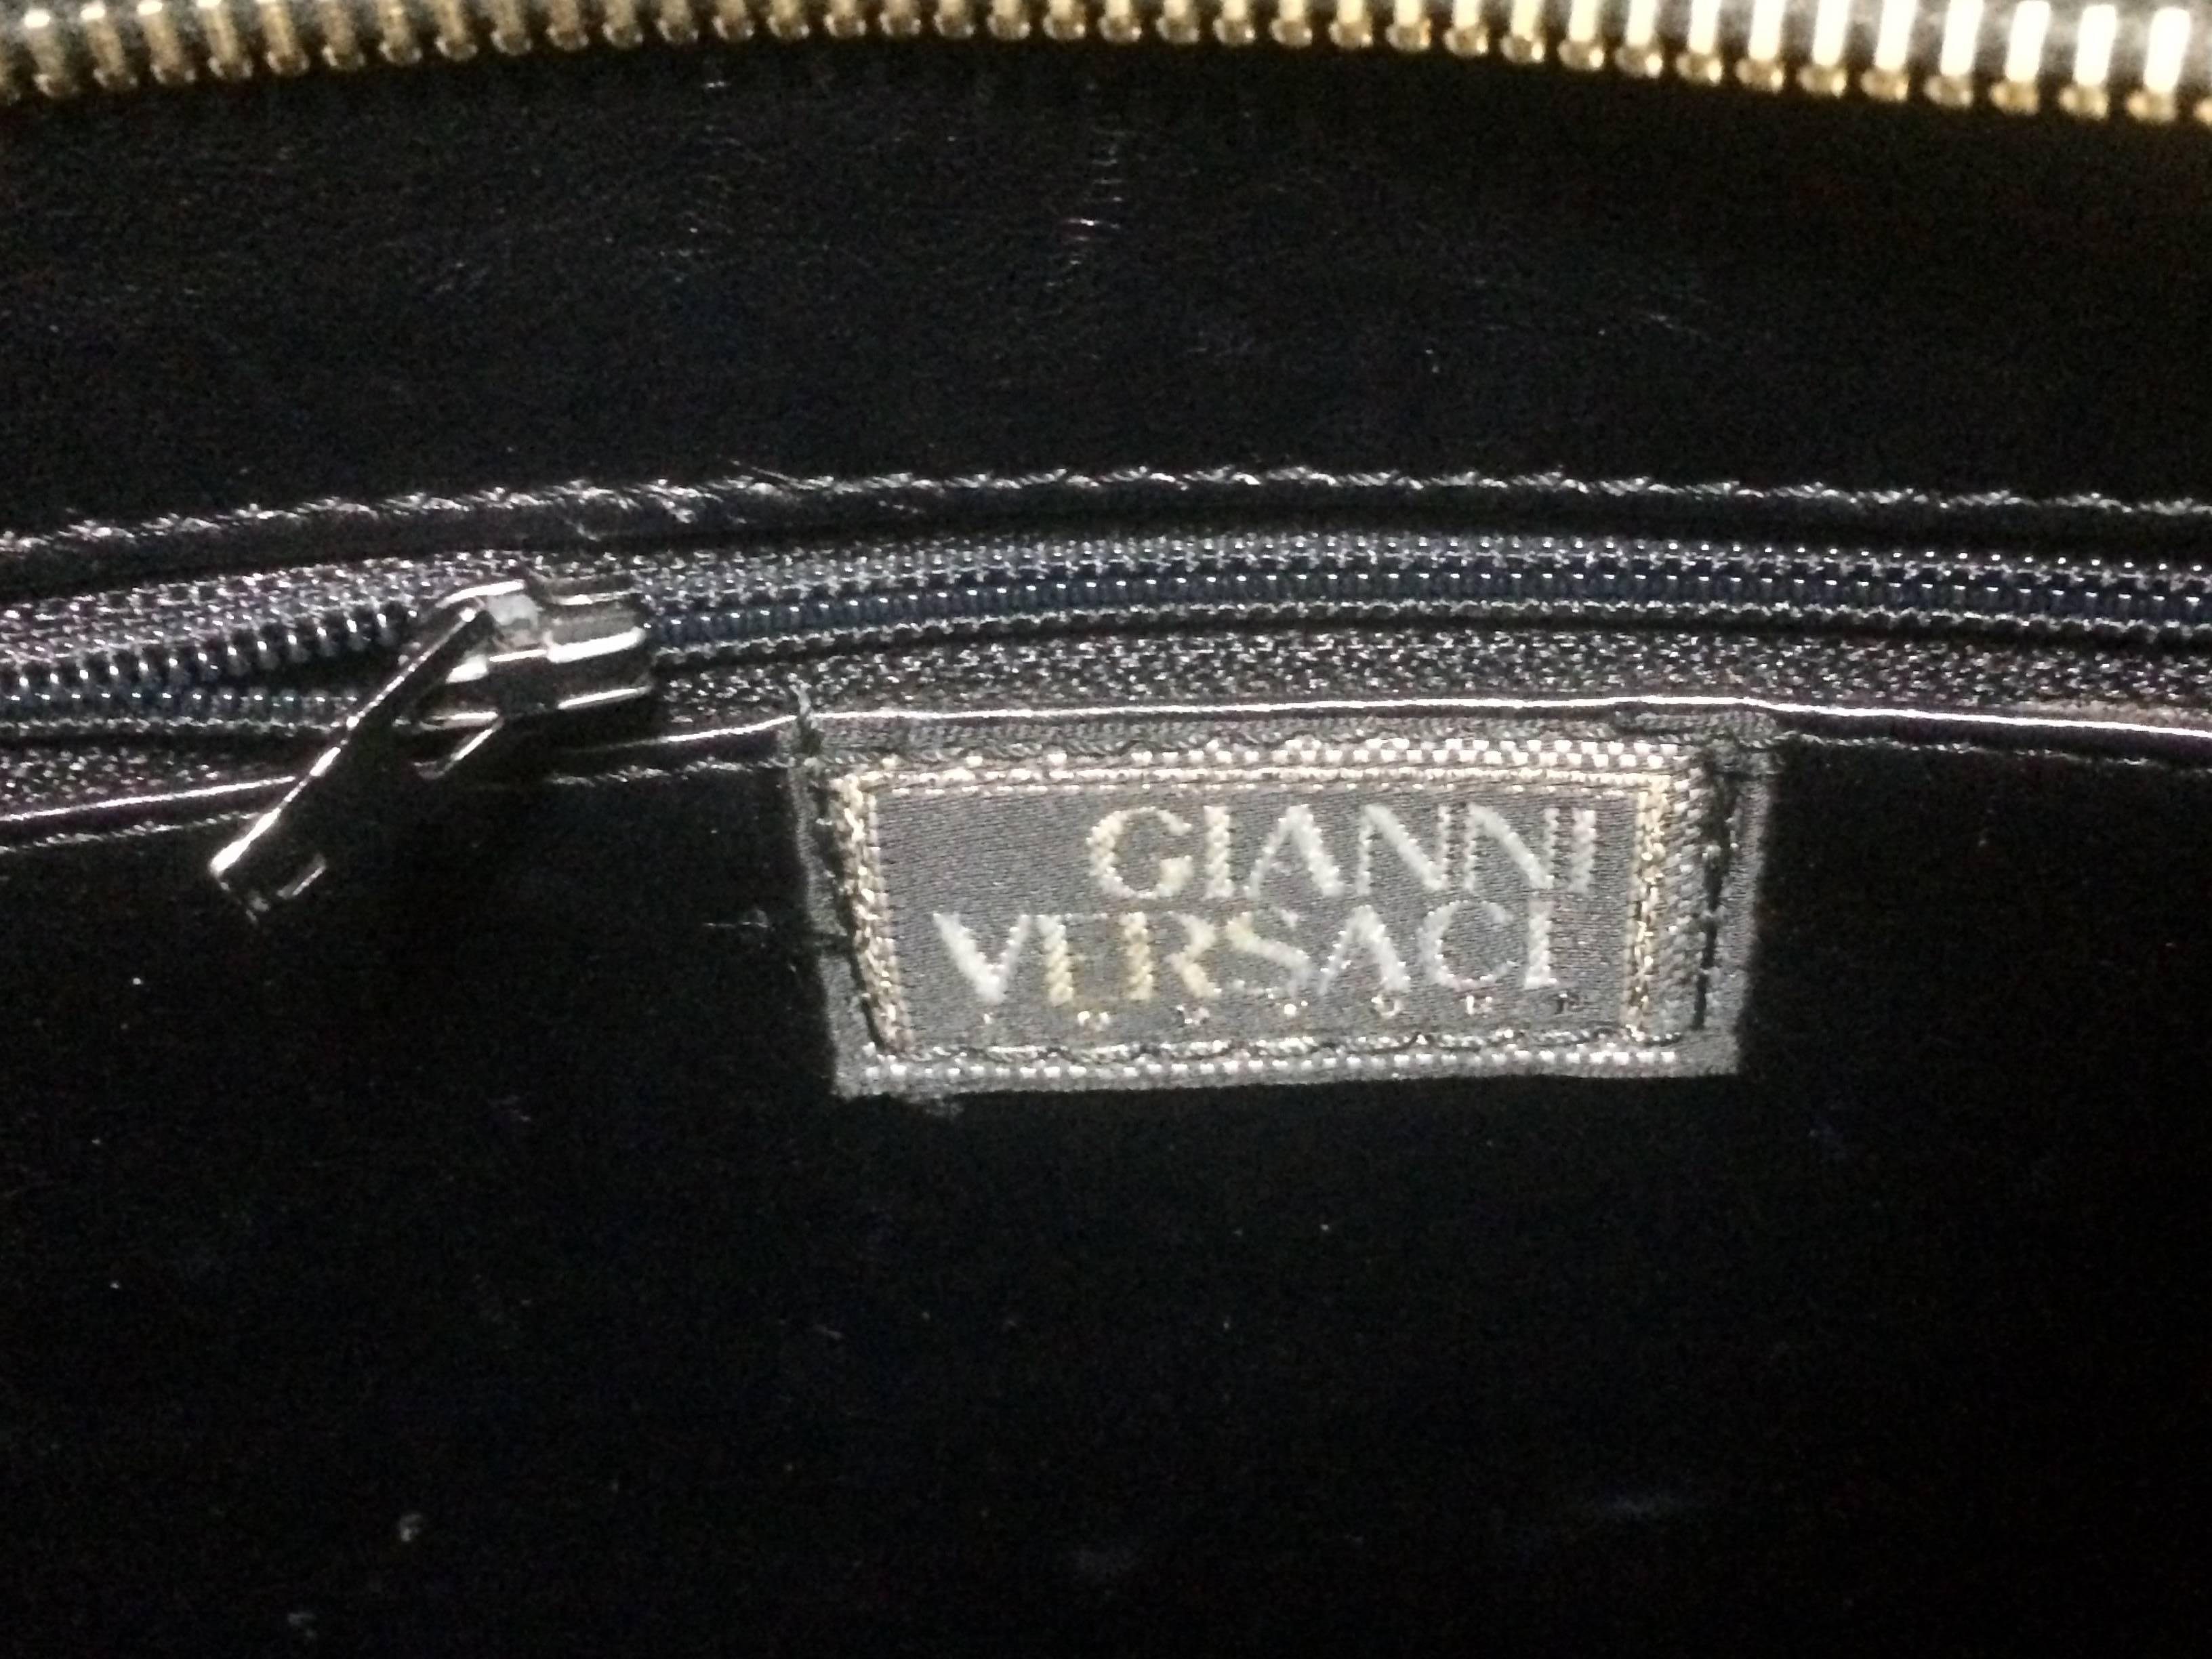 Vintage Gianni Versace black tote bag with golden medusa charms and handles. 3